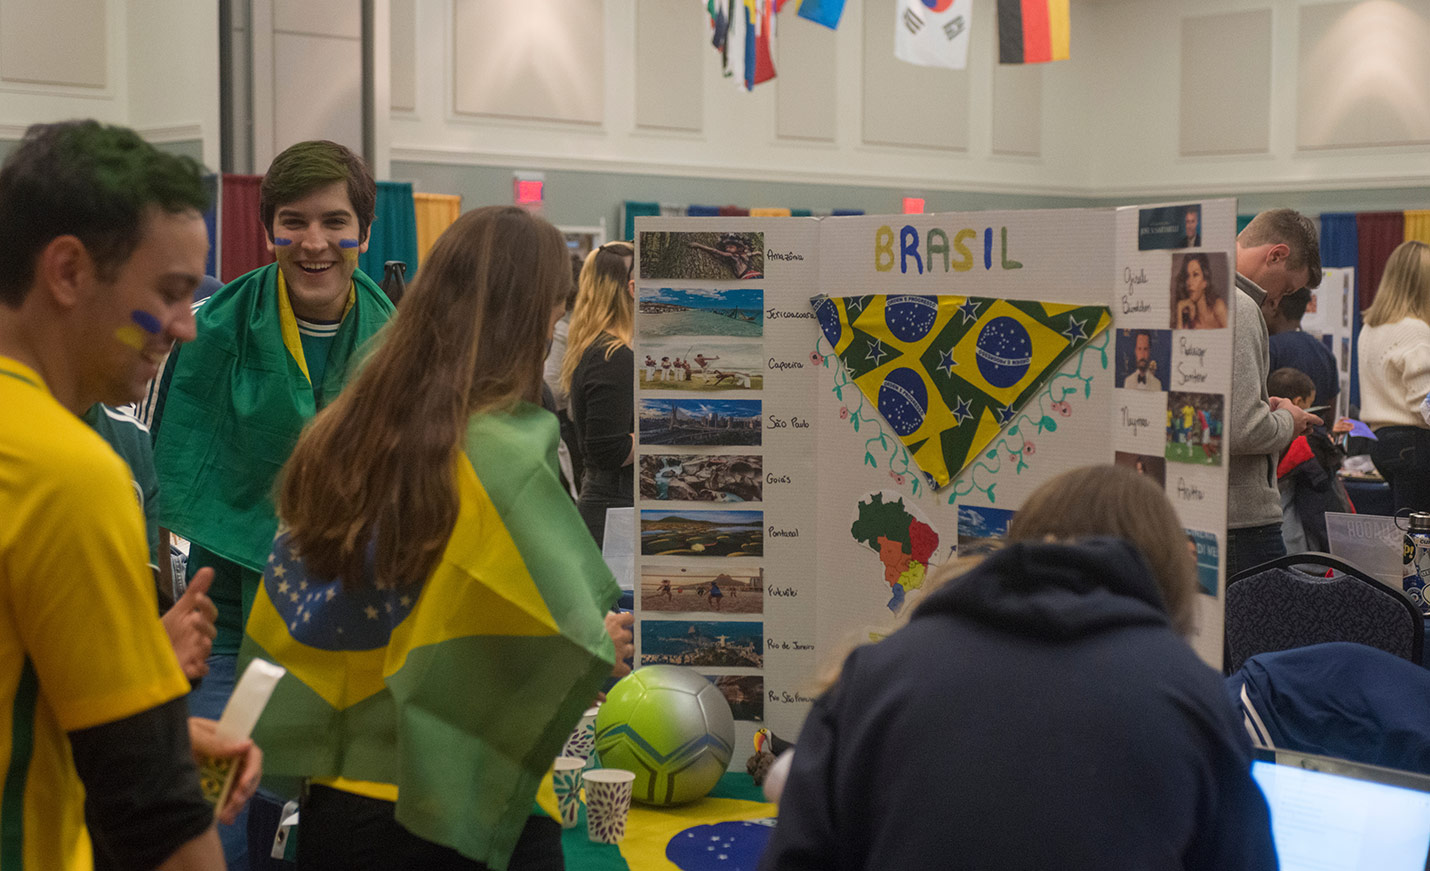 Students at the Brazil booth at the Intercultural Festival